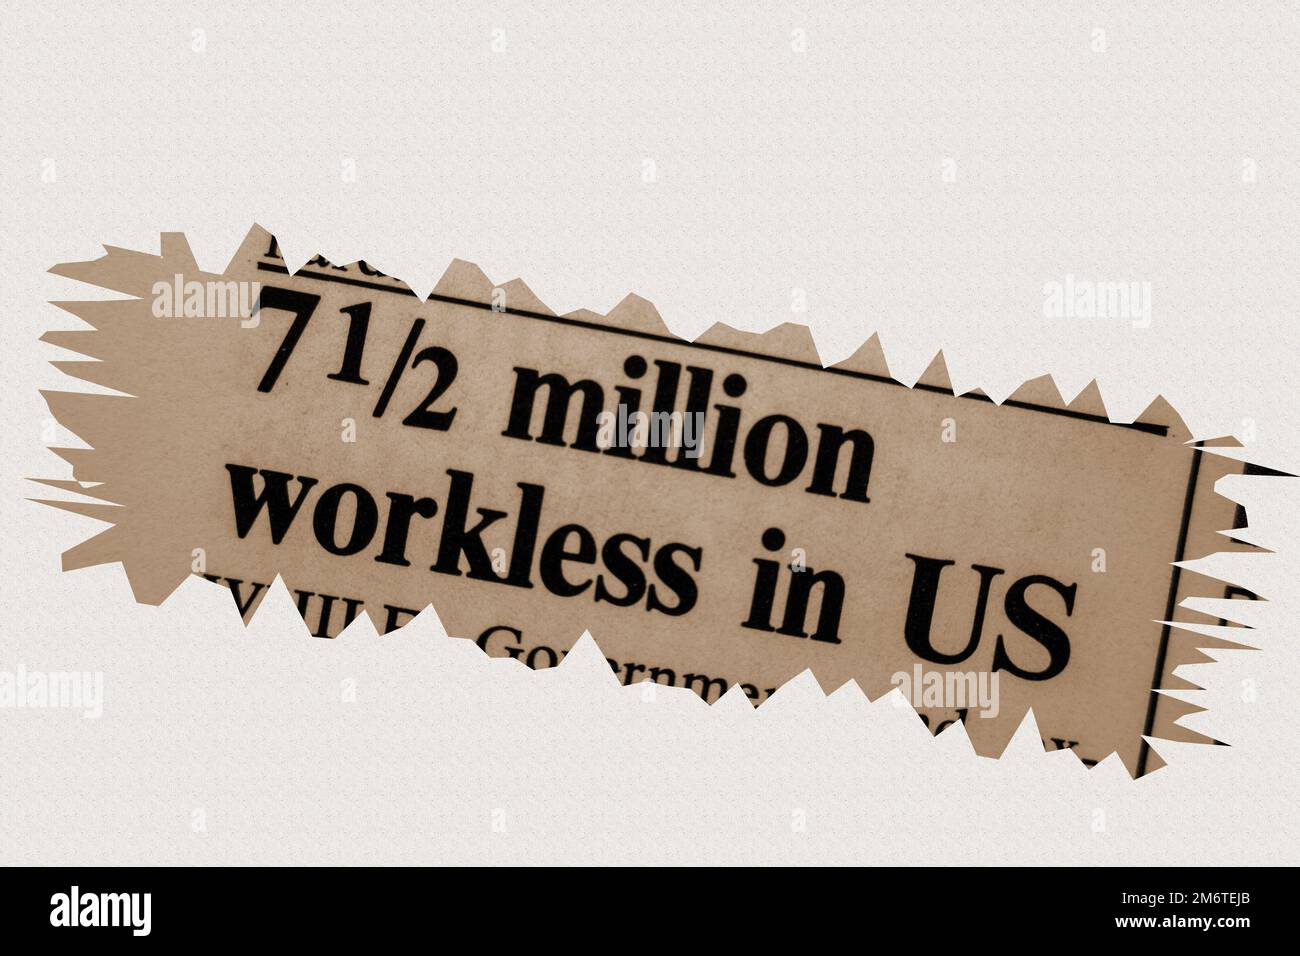 7.5 million workless in US  - news story from 1975 newspaper headline article title with overlay in sepia Stock Photo